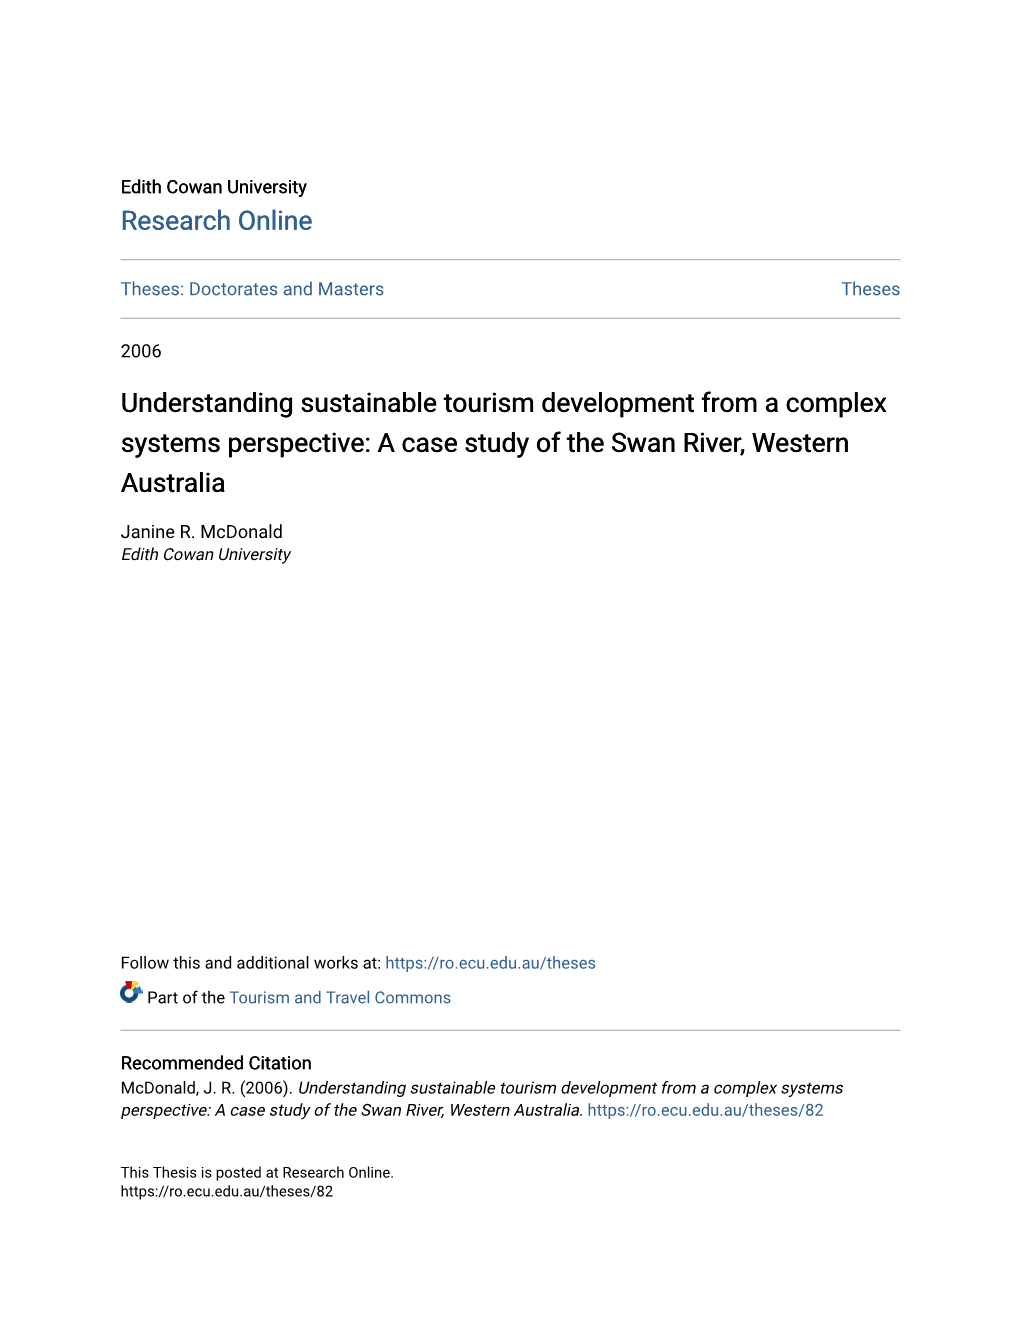 Understanding Sustainable Tourism Development from a Complex Systems Perspective: a Case Study of the Swan River, Western Australia